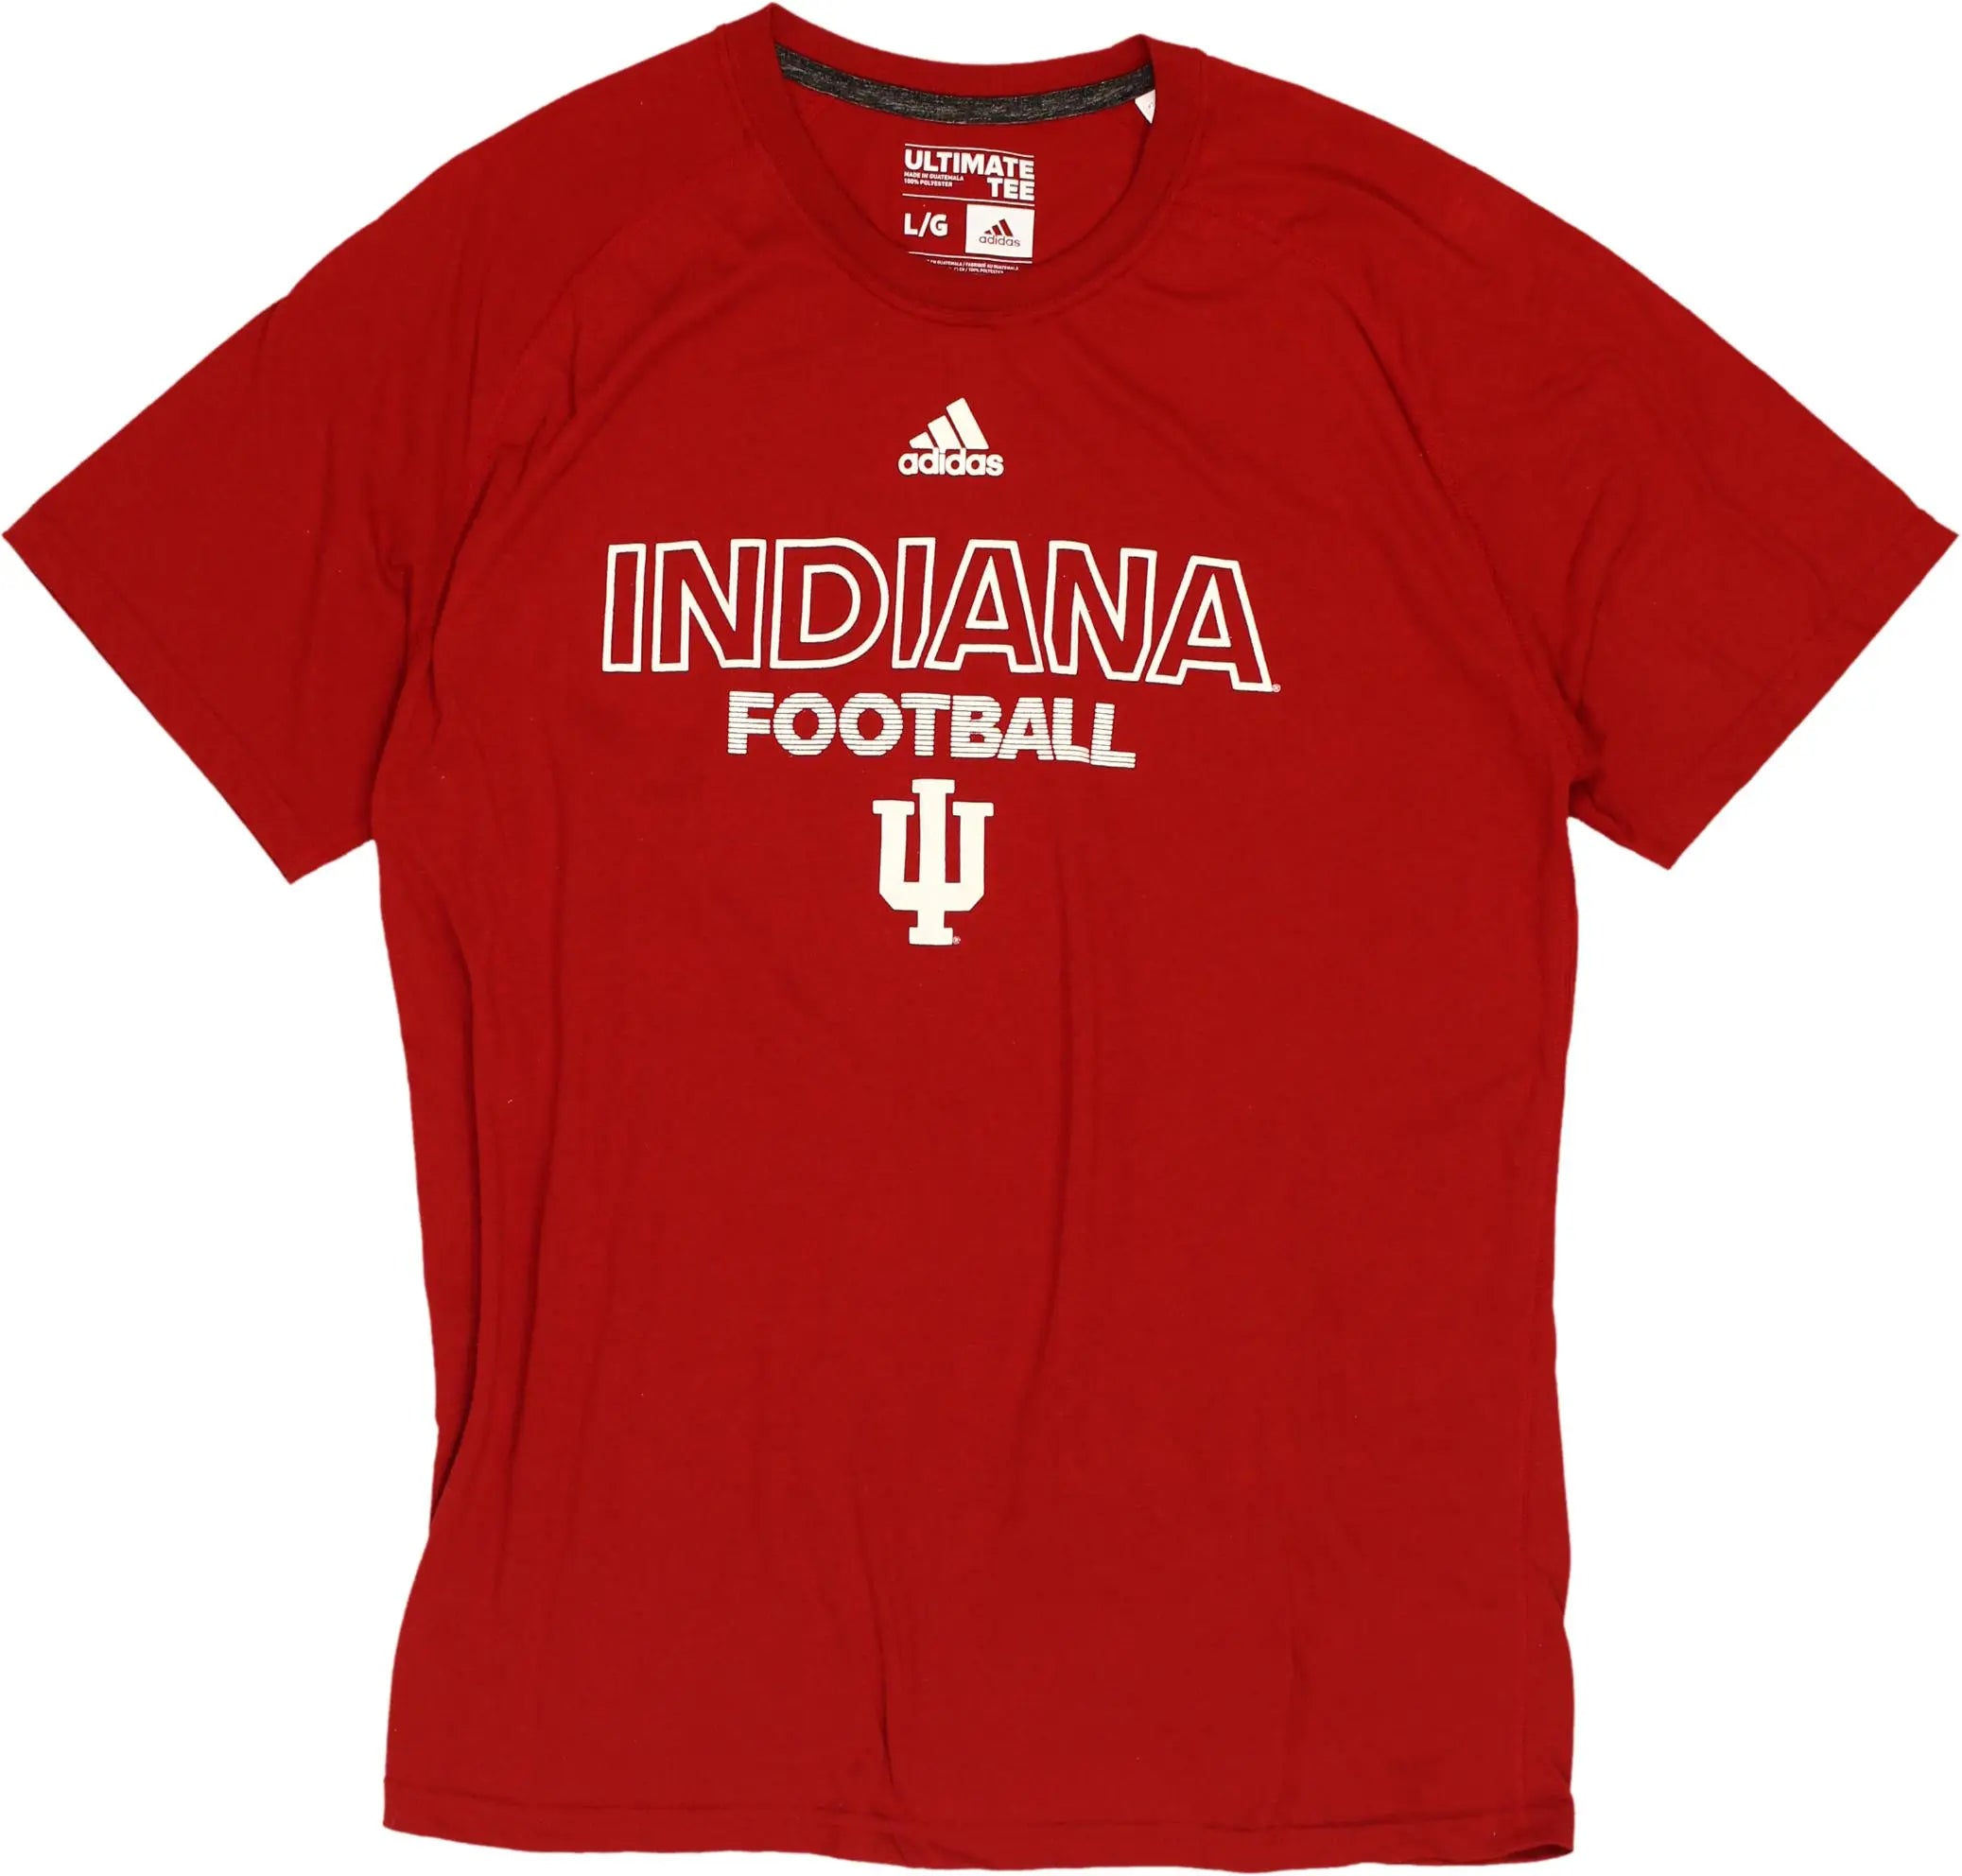 Adidas - Indiana Football T-shirt- ThriftTale.com - Vintage and second handclothing